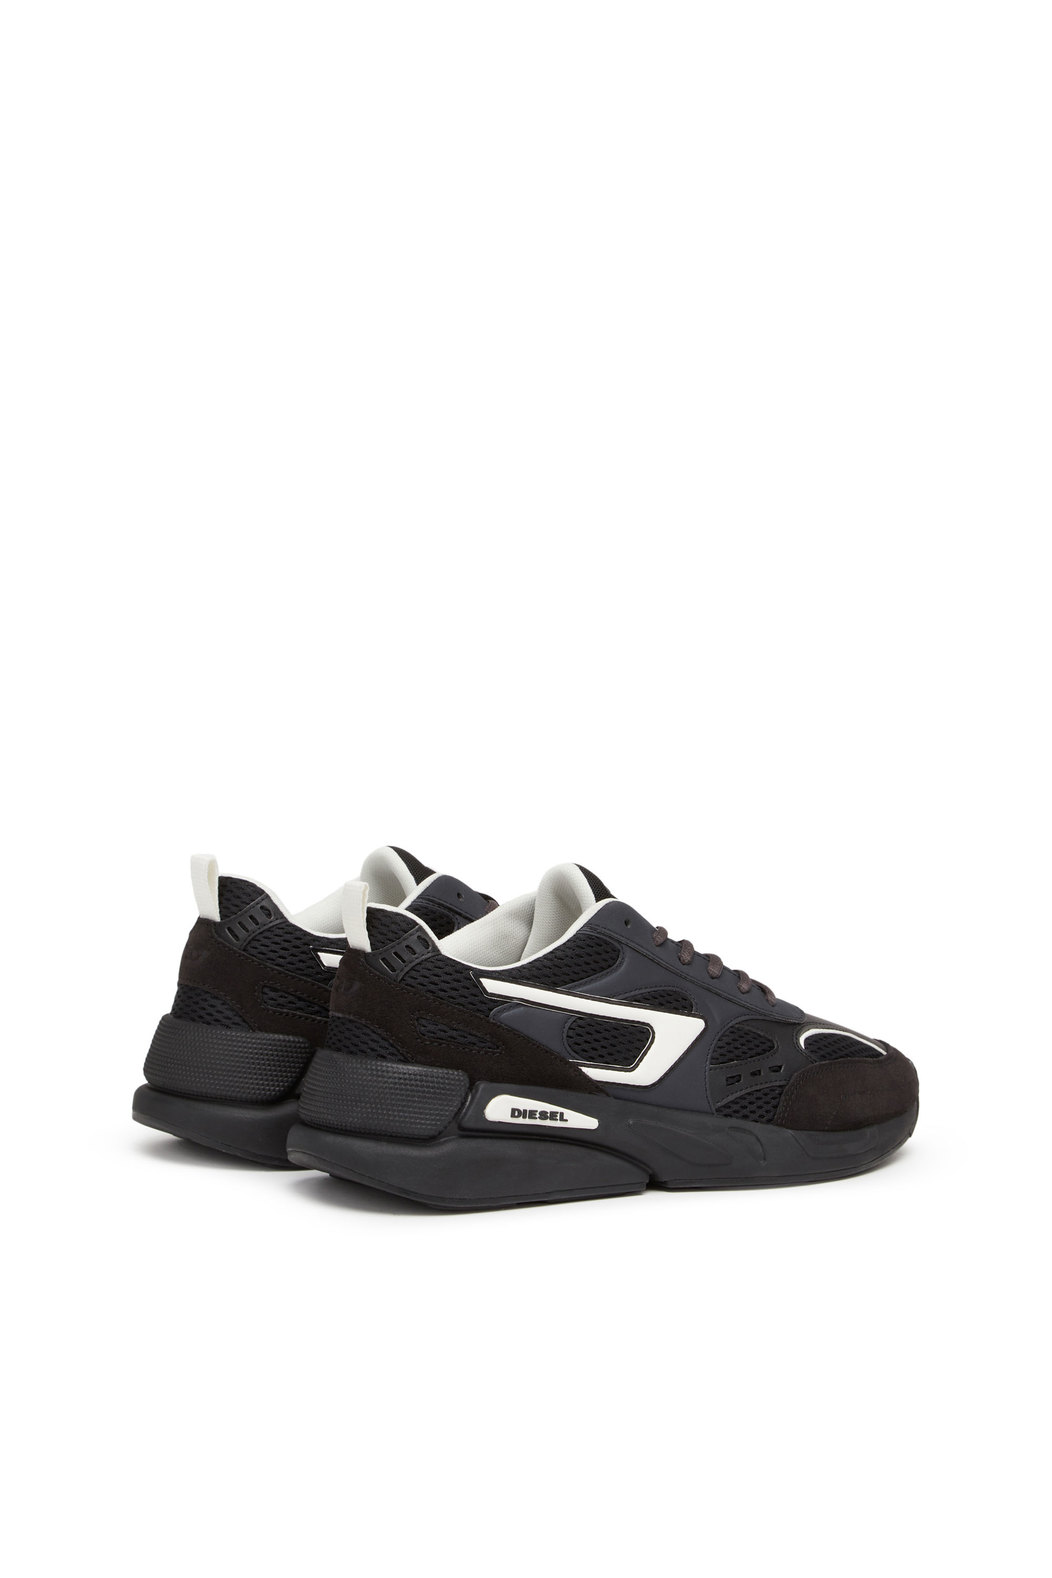 S-Serendipity Sport - Sneakers in mesh and suede